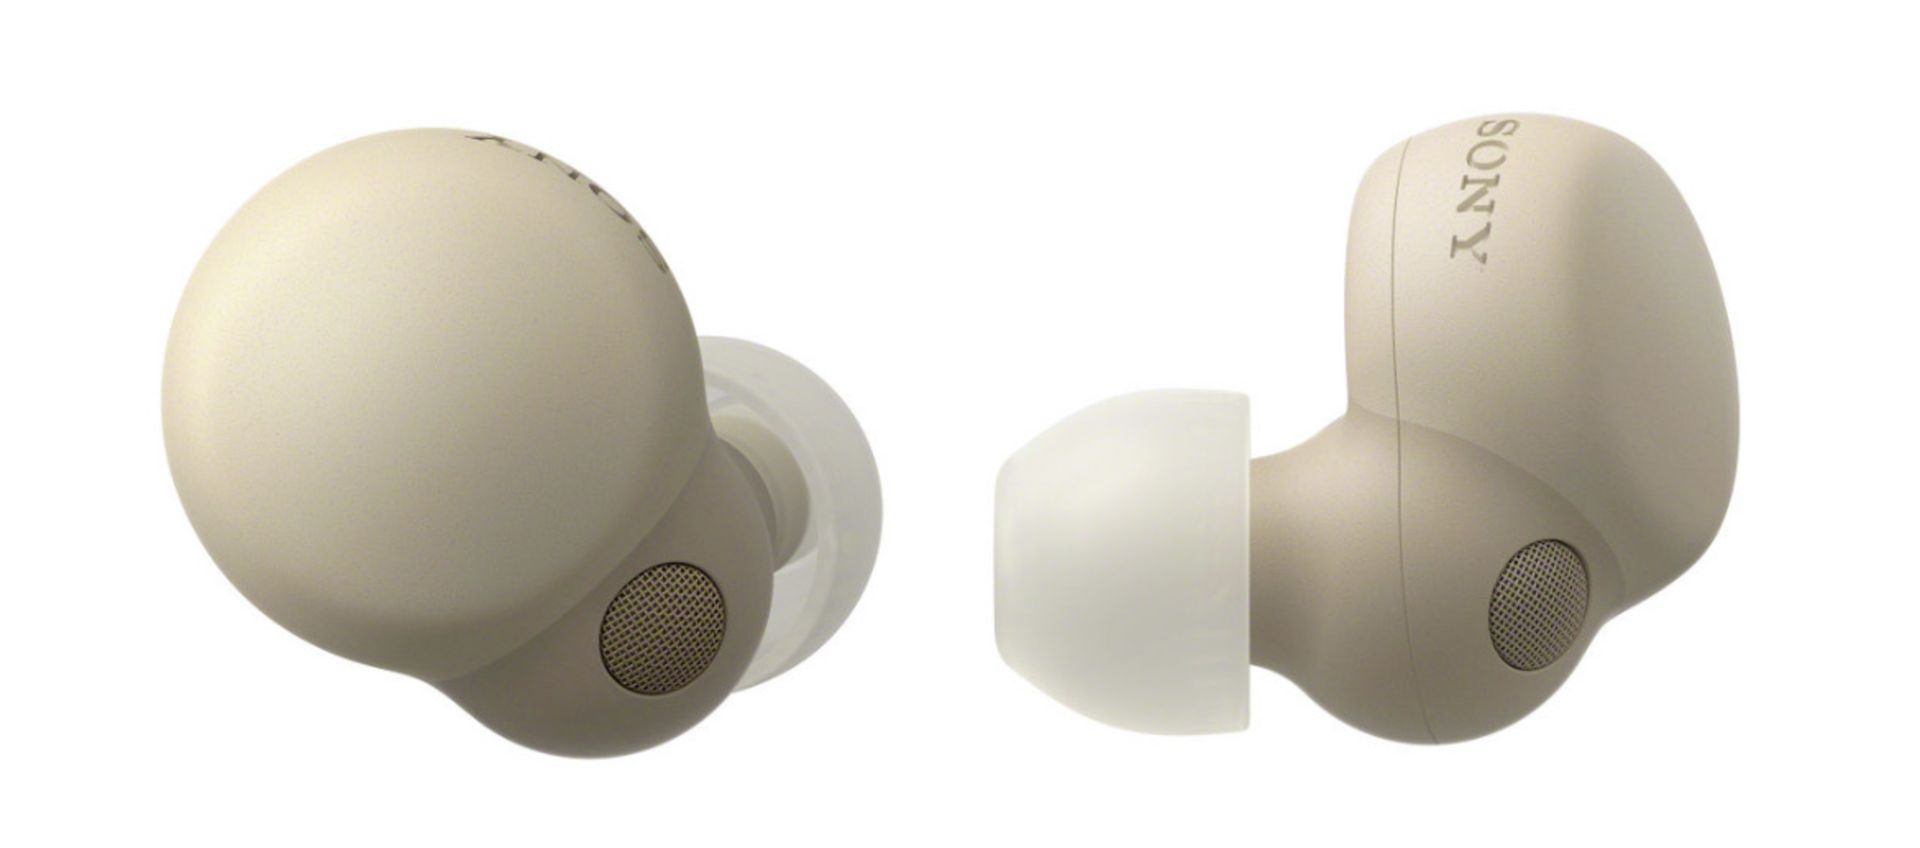 SONY LINKBUDS S WIRELESS NOISE-CANCELLING, WATER RESISTANT HEADPHONES IN BEIGE - RRP £149 - Image 4 of 6